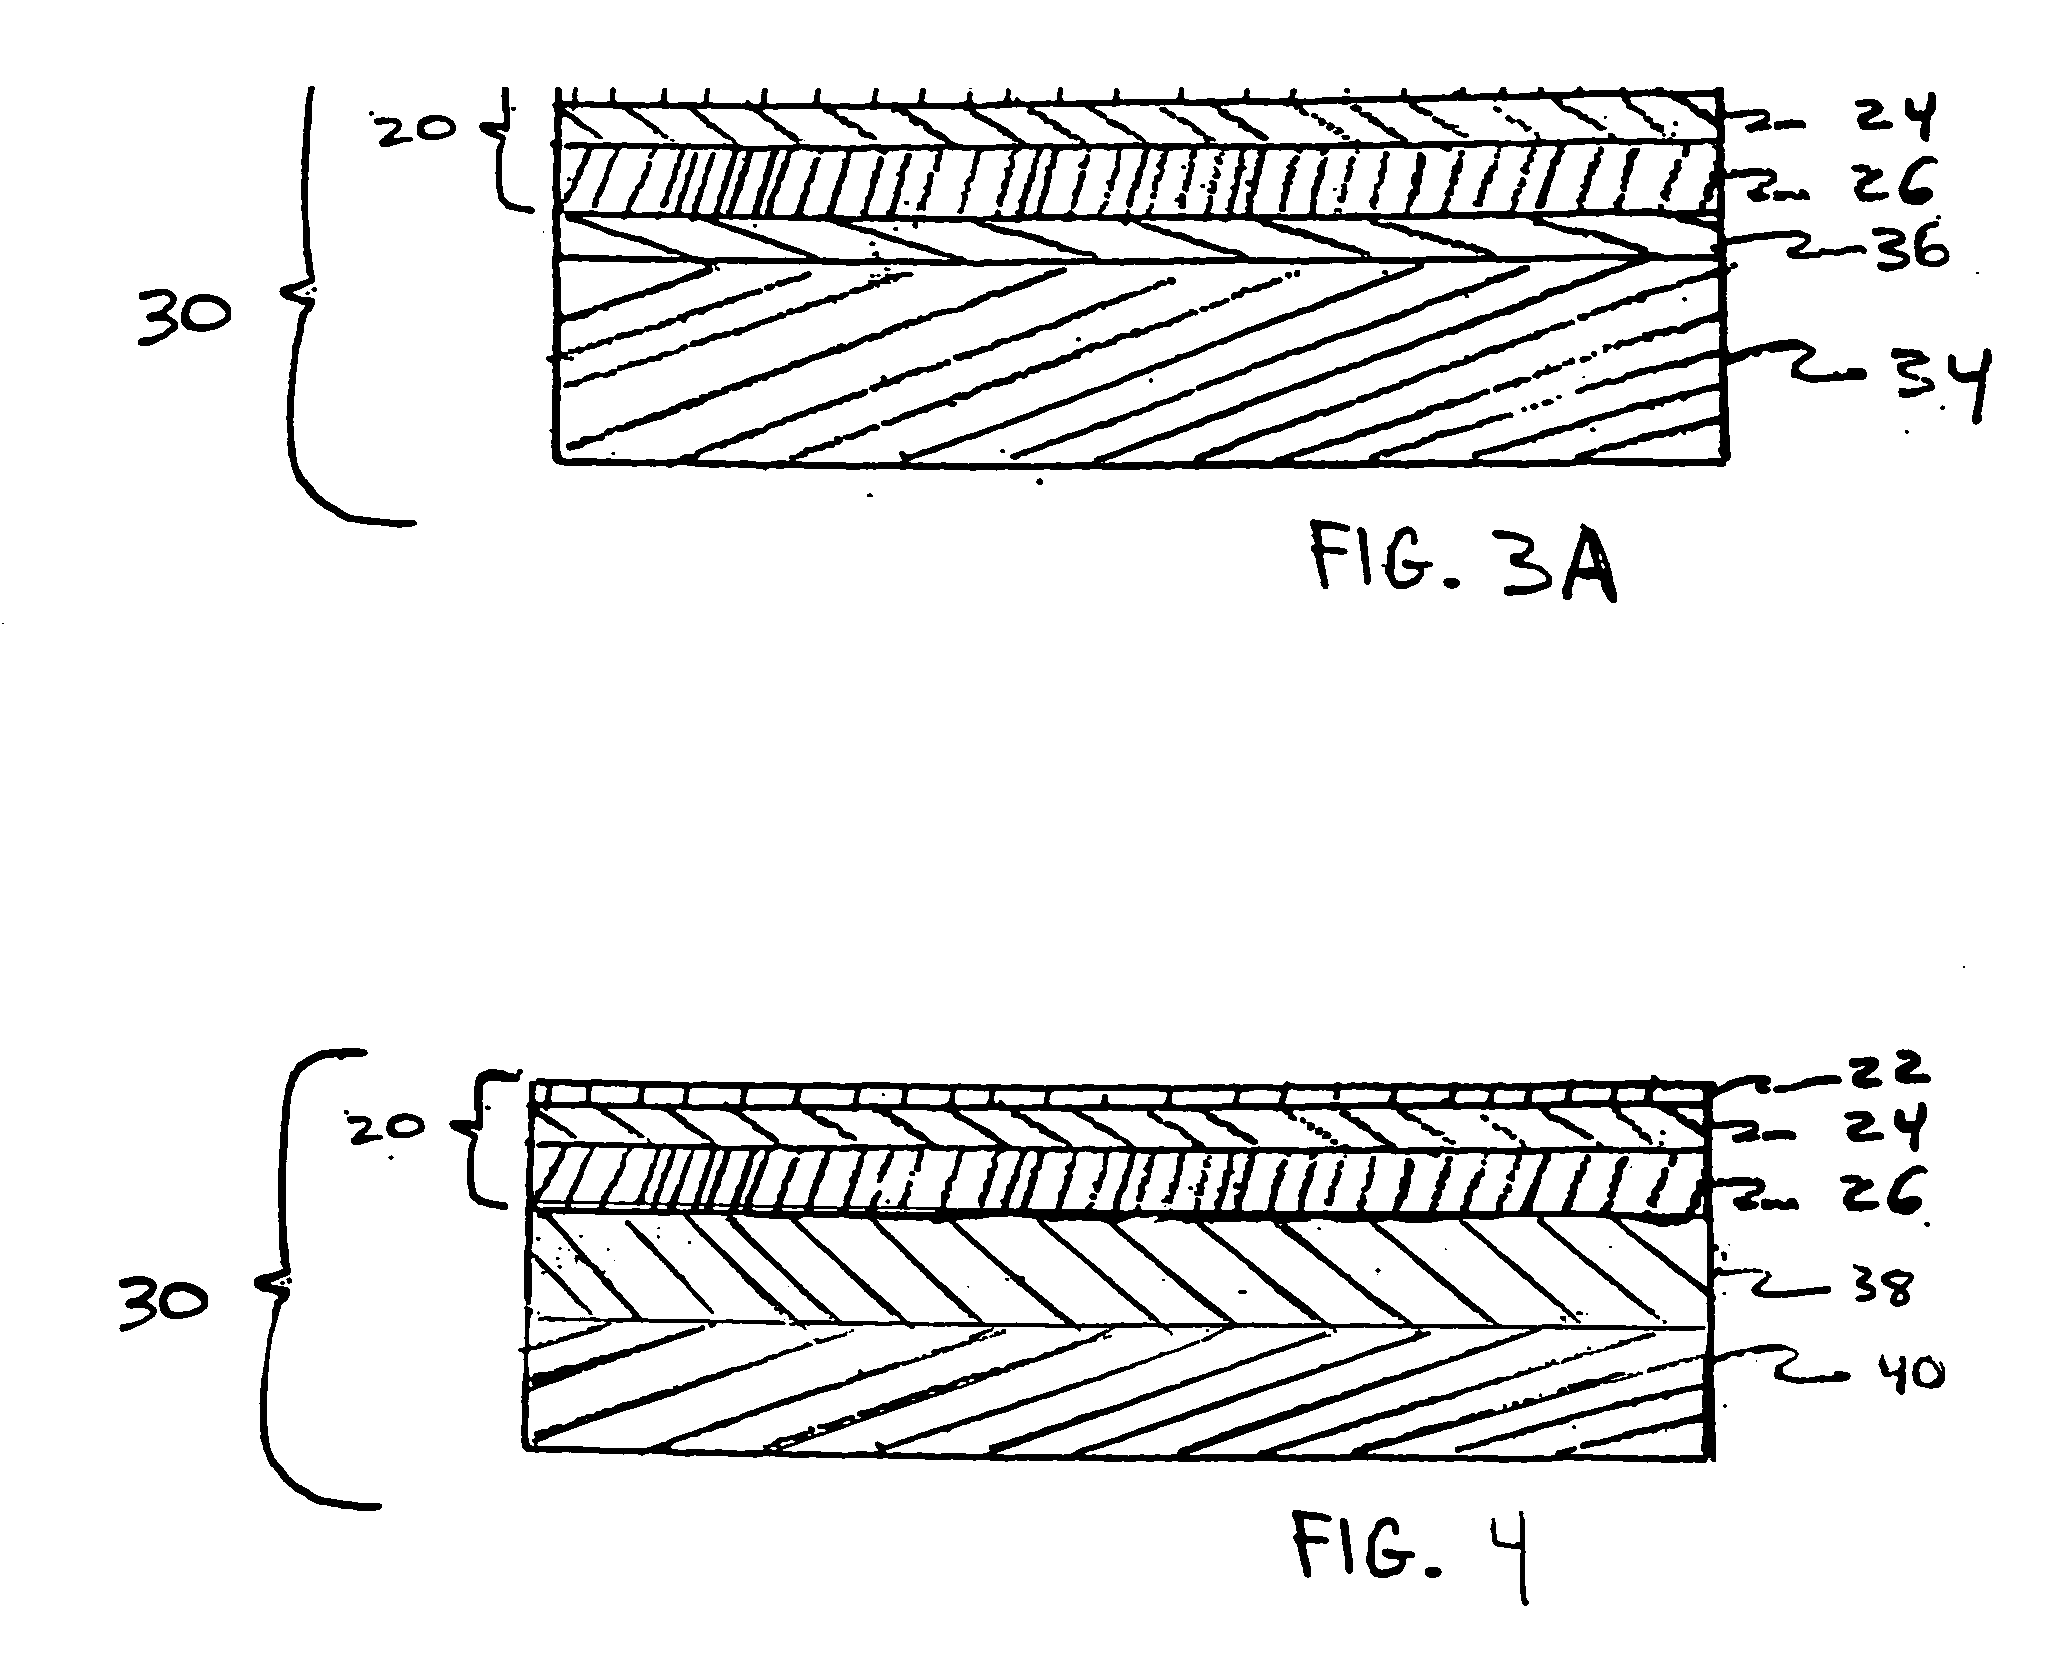 Decorative laminate assembly and method of producing same